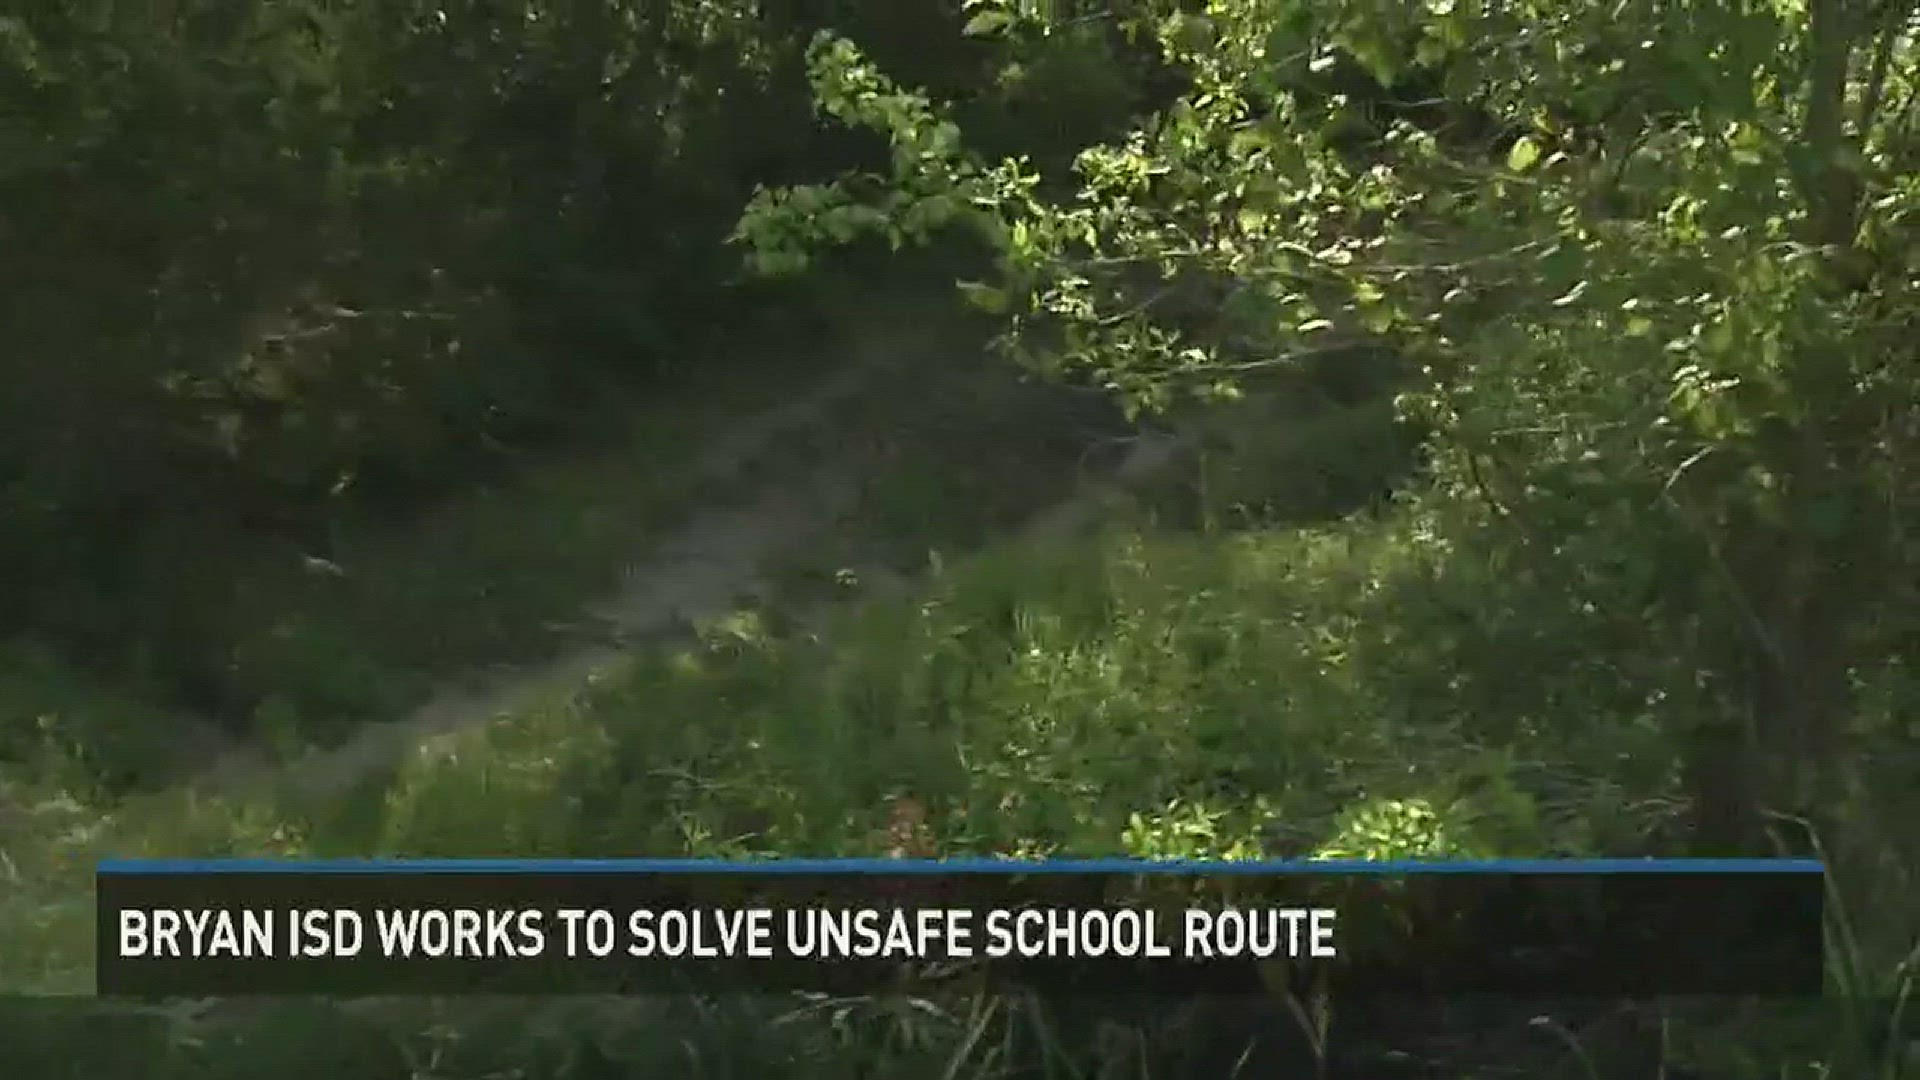 Mother is concerned about route children have to walk to school.